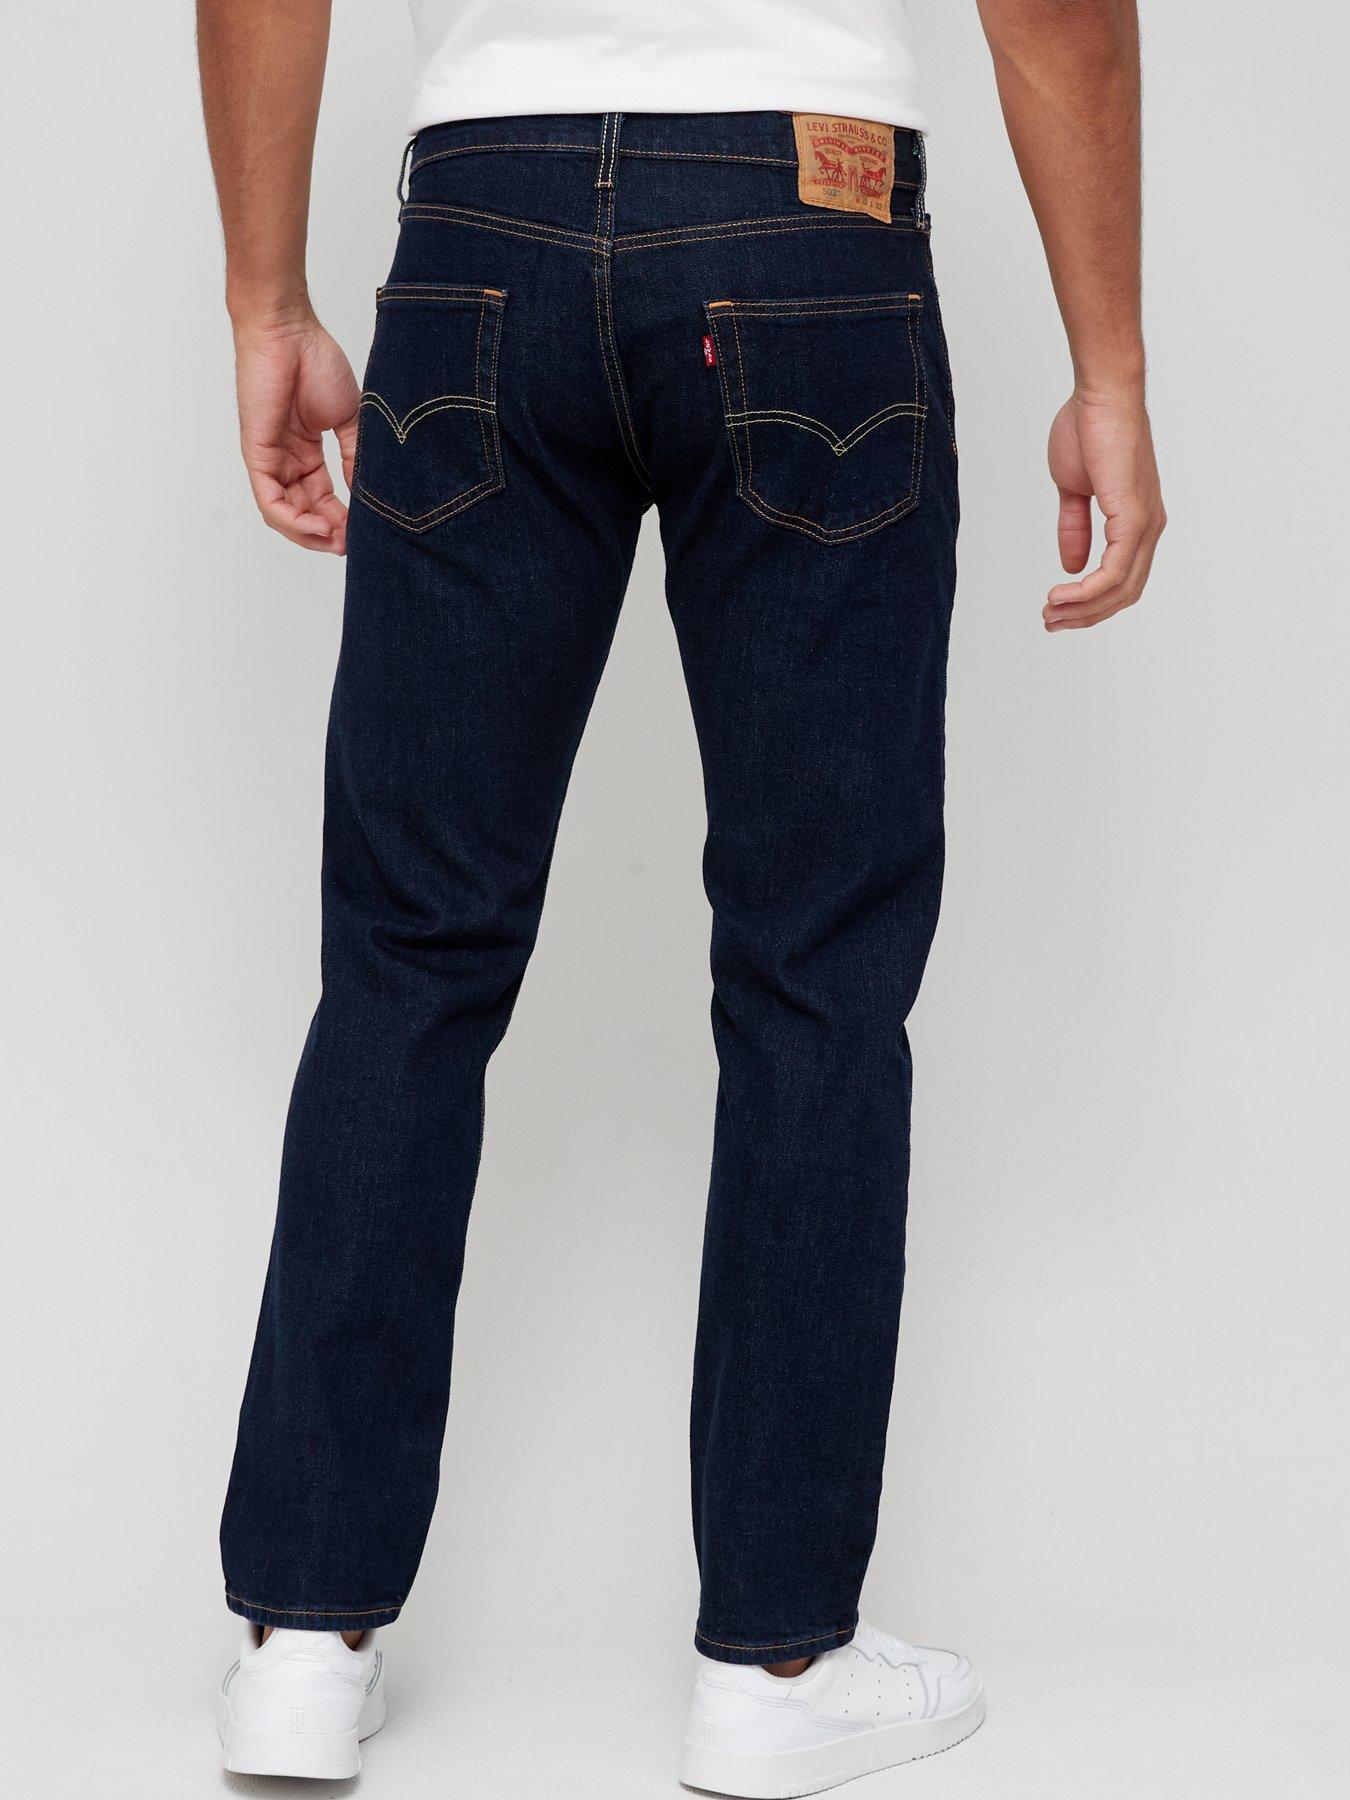 Levi's 502™ Tapered Fit Jeans - Ama Rinsey - Dark Blue